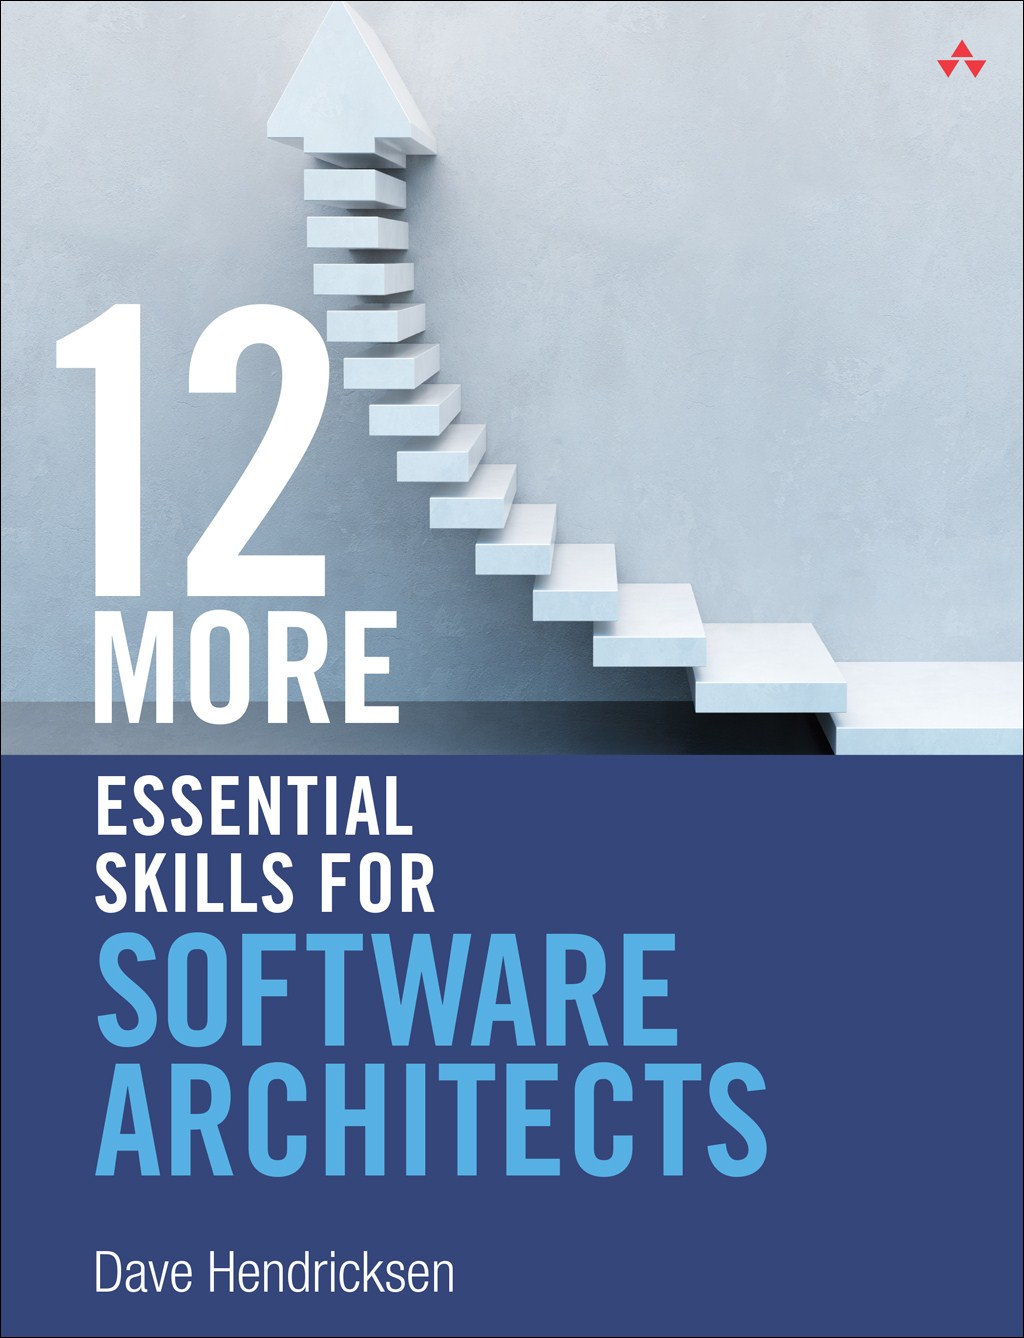 12 essential skills for software architects download